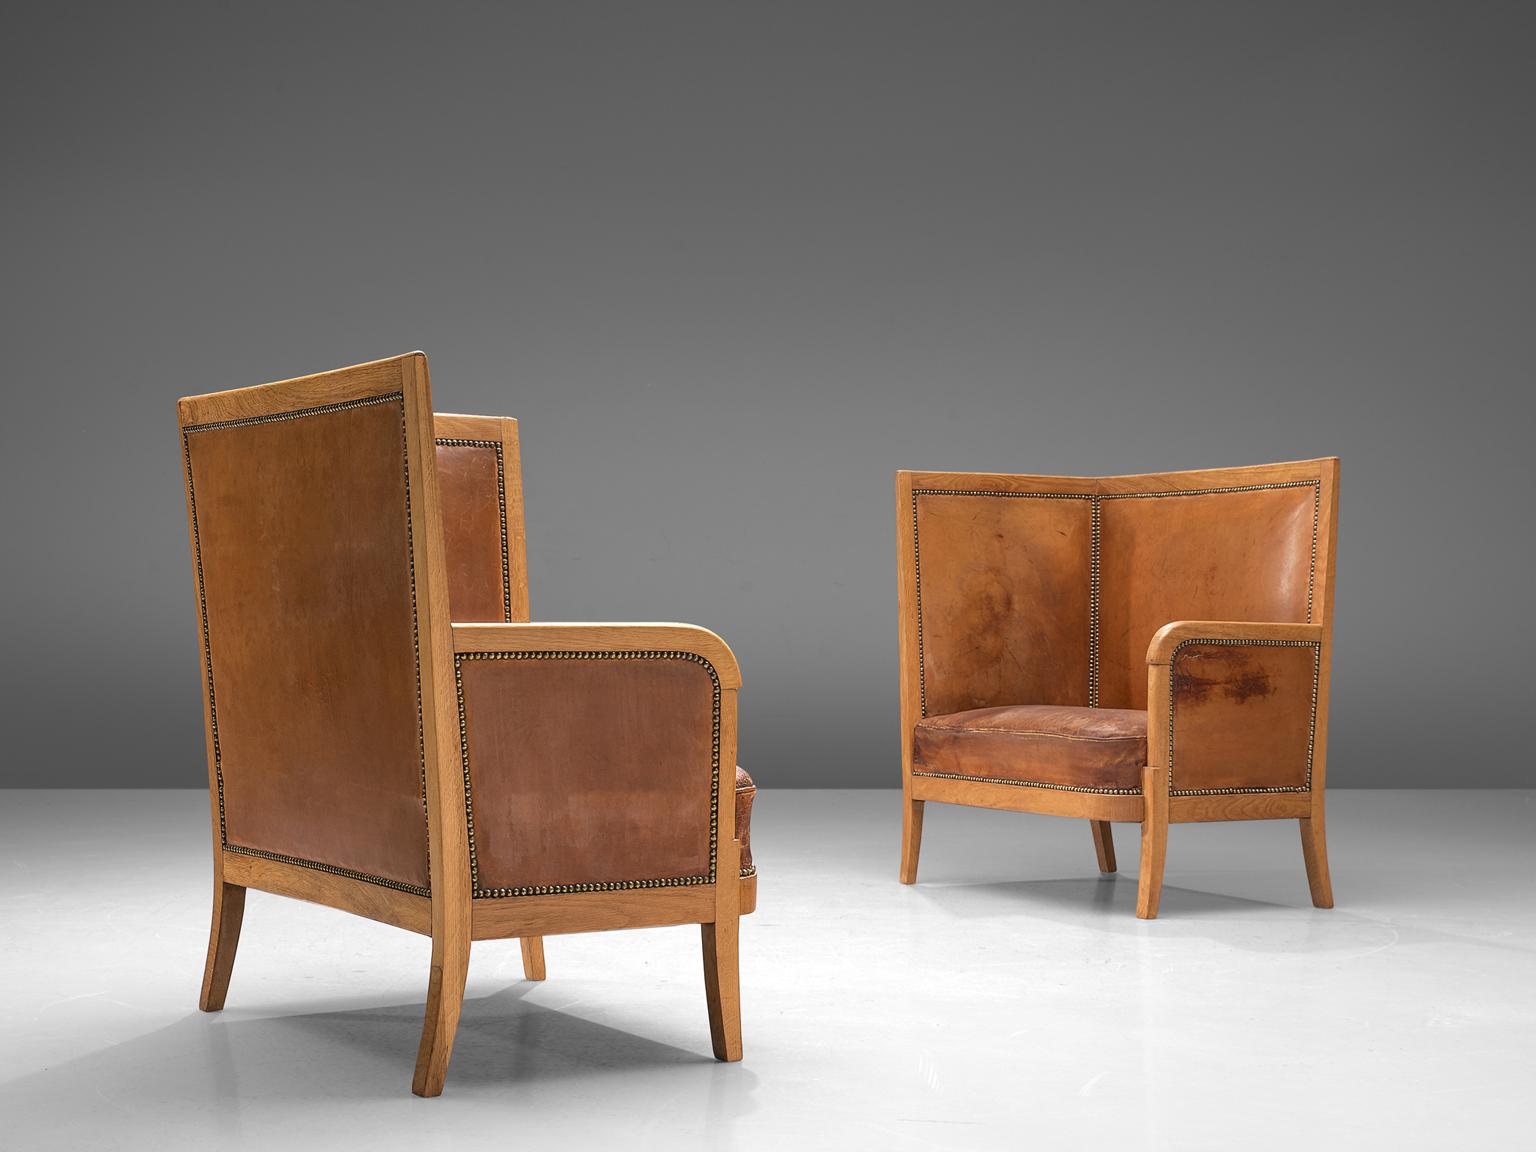 Set of two lounge chairs, in oak and cognac leather, Scandinavia, 1940s. 

Set of two high back chairs upholstered in high quality cognac leather. This luxurious set is made of an oak frame with nice round shapes and lines. The aesthetics of this